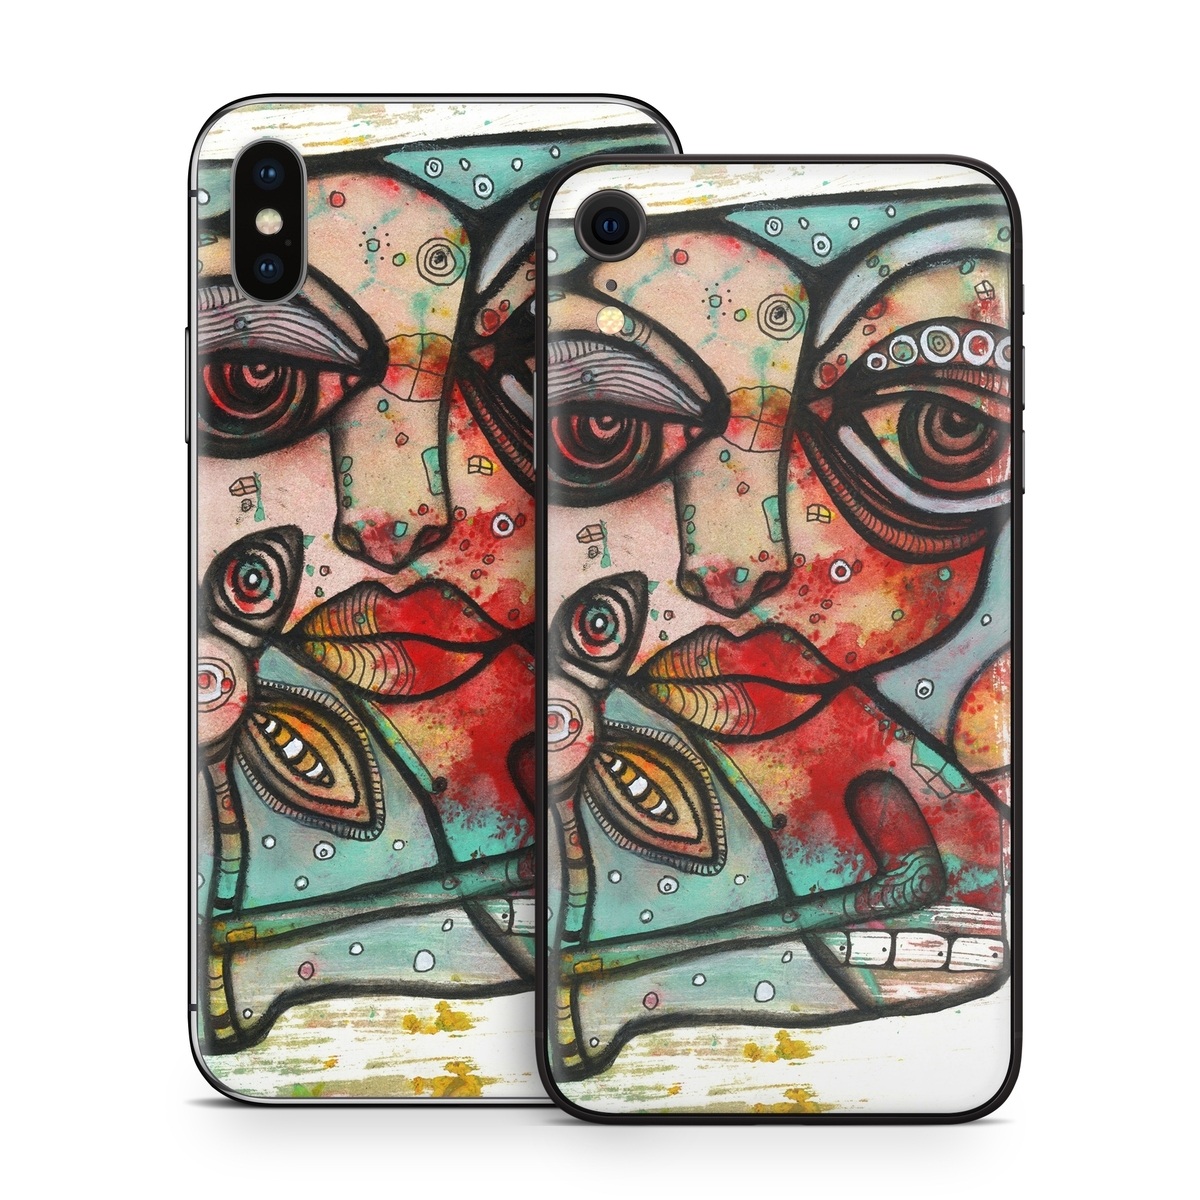 iPhone XS Skin design of Modern art, Art, Painting, Illustration, Visual arts, Psychedelic art, Acrylic paint, Watercolor paint, Graffiti, Drawing with gray, black, red, green, blue, white colors